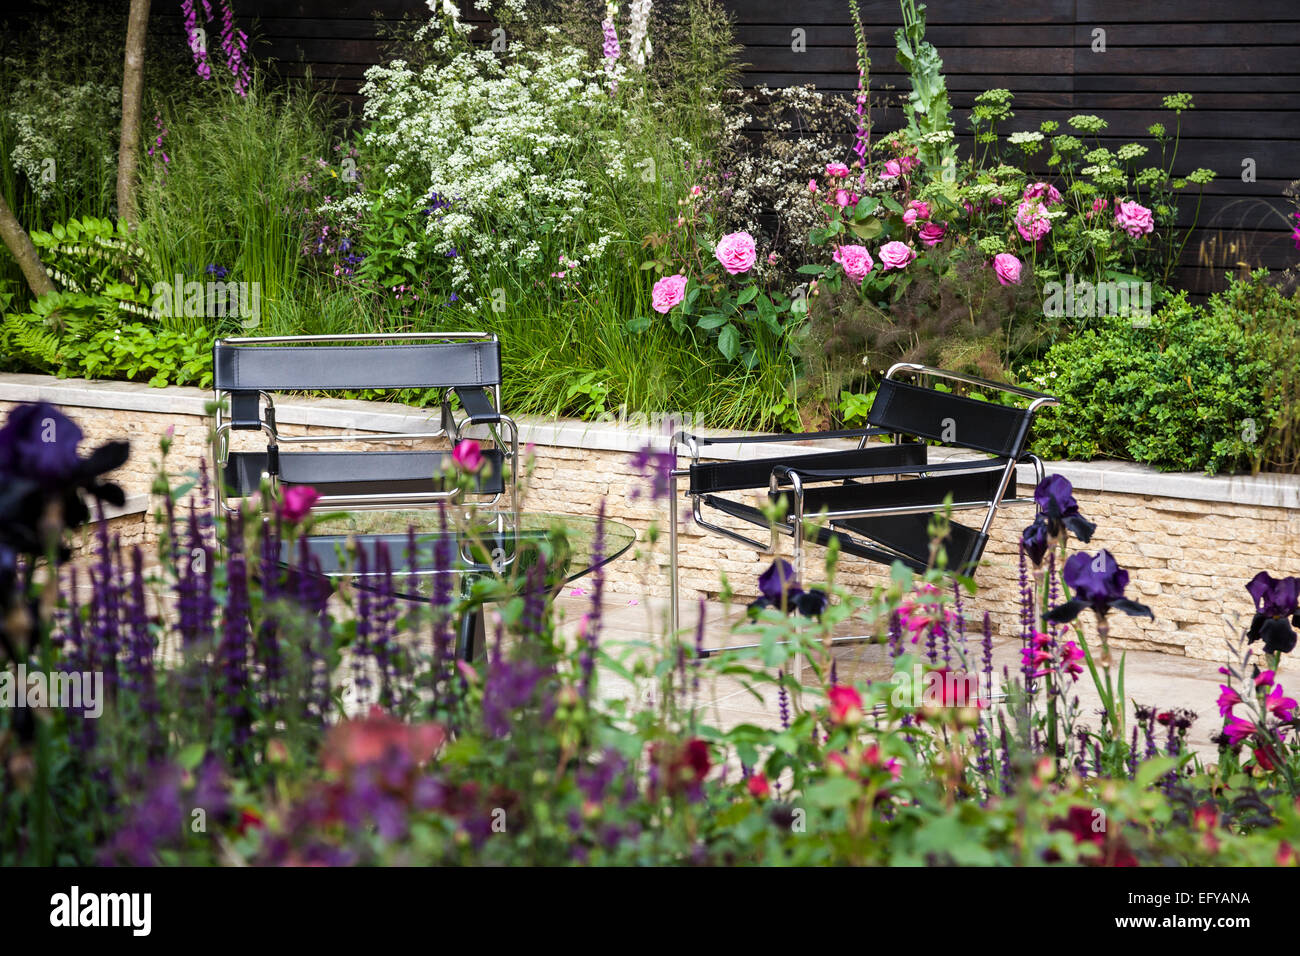 Black leather seats on stone terrace with raised bed made of stones and borders with naturalistic planting Stock Photo